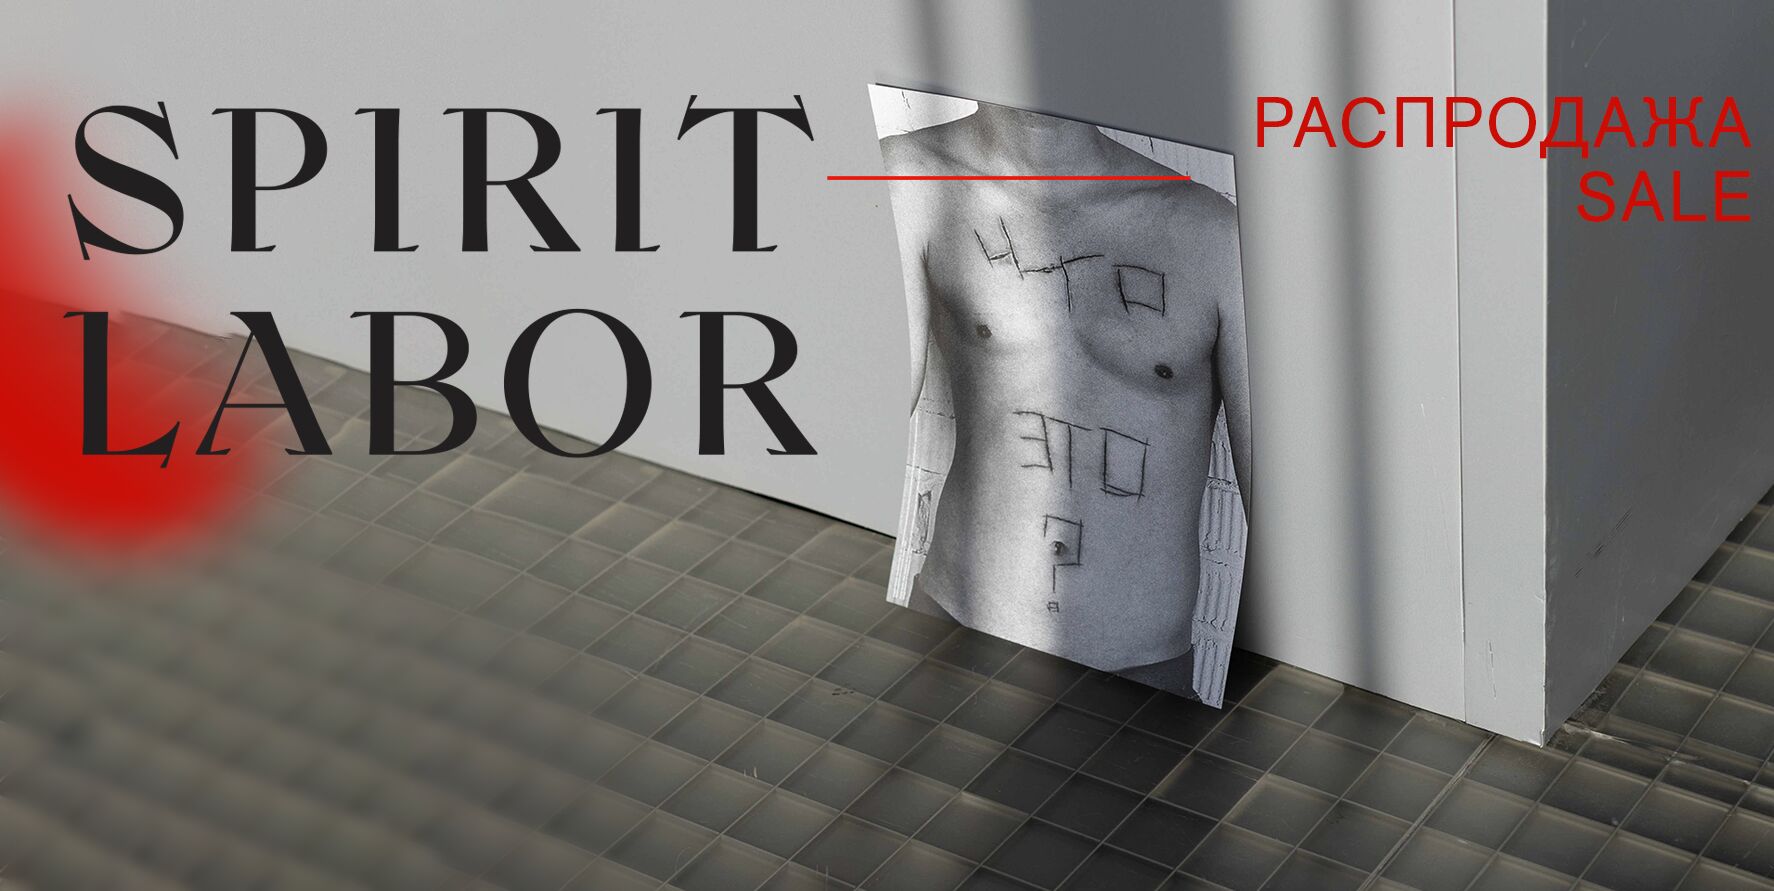 SPIRIT LABOR: DURATION, DIFFICULTY, AND AFFECT